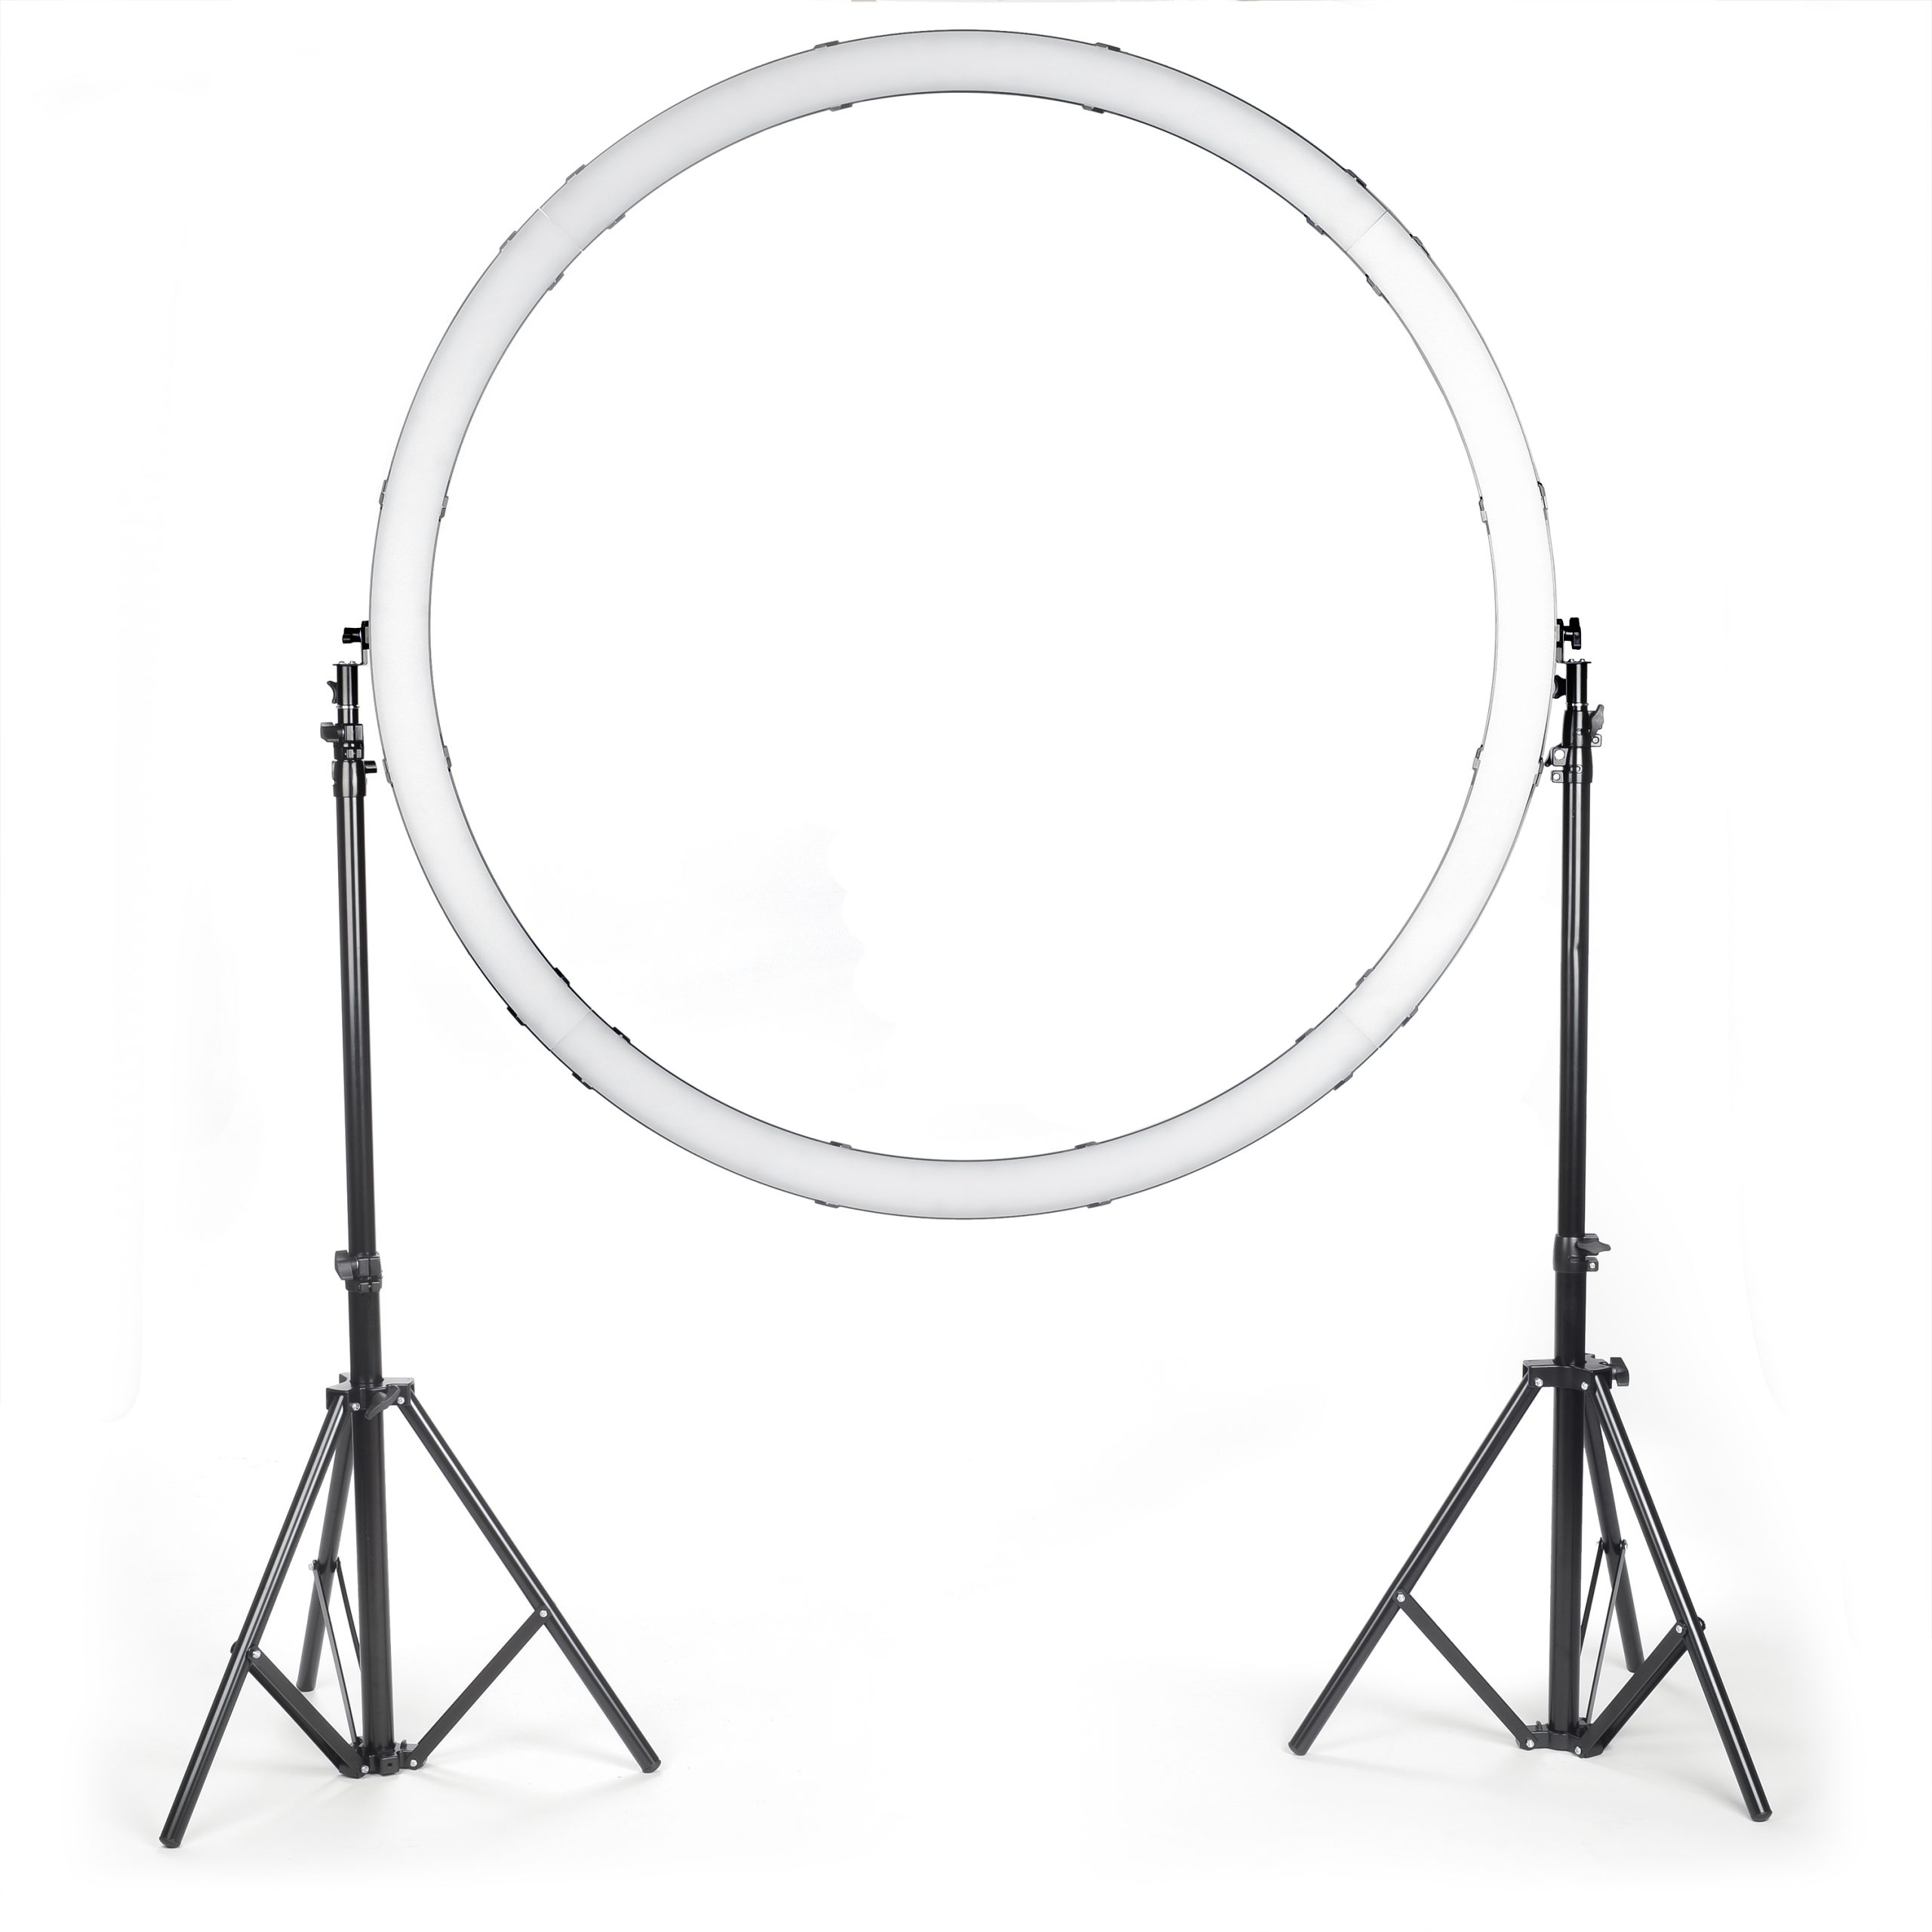 Saturn Pro 48 Bi-Color LED Ring Light System with Stands and Case